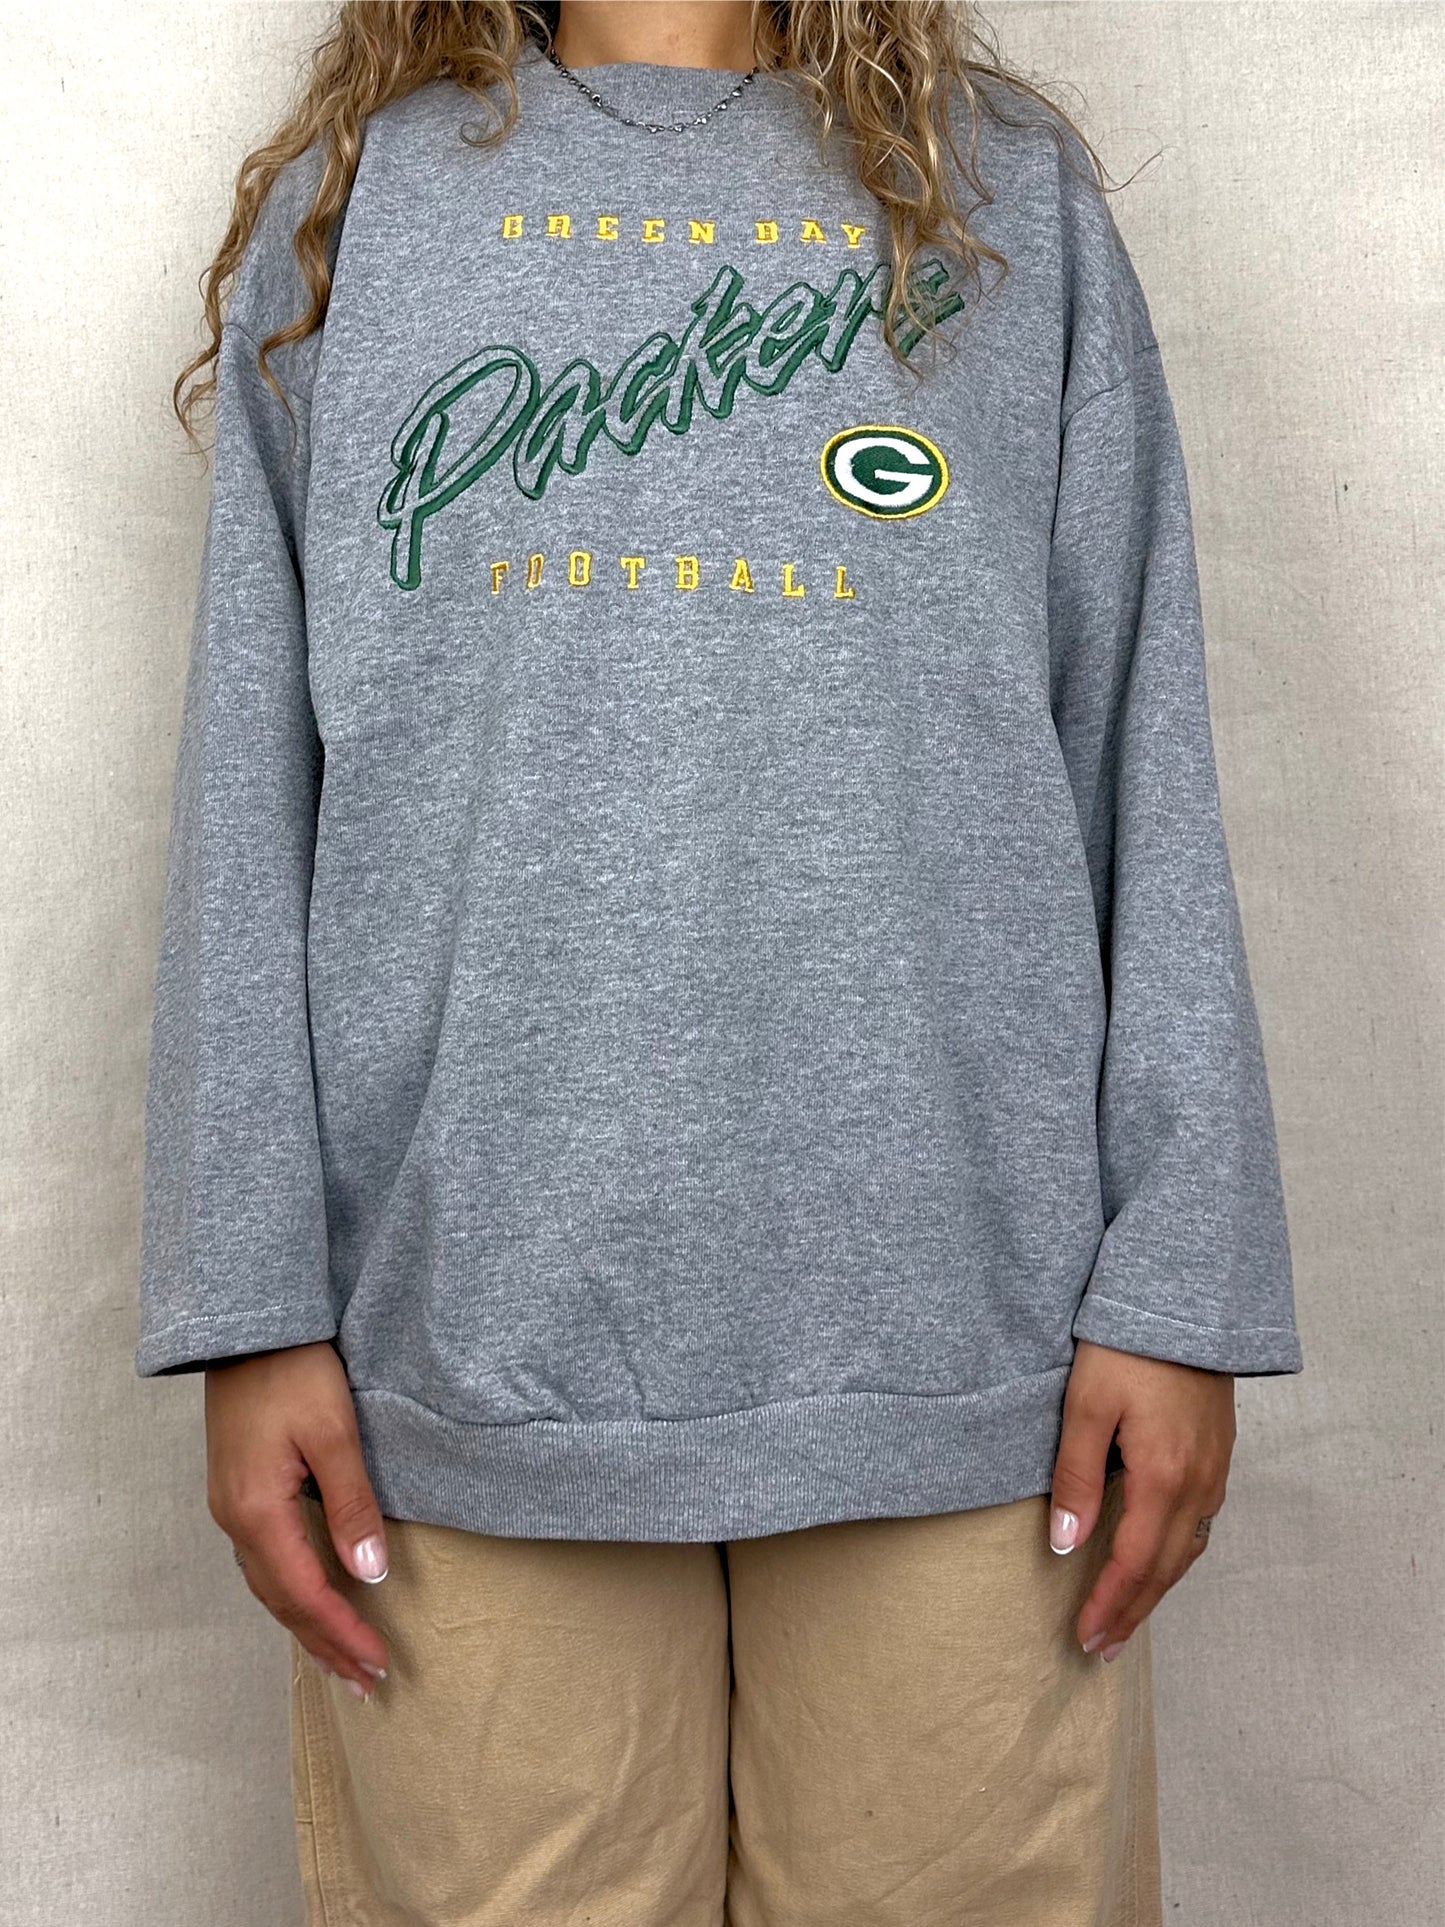 90's Green Bay Packers NFL Embroidered Vintage Sweatshirt Size 14-16